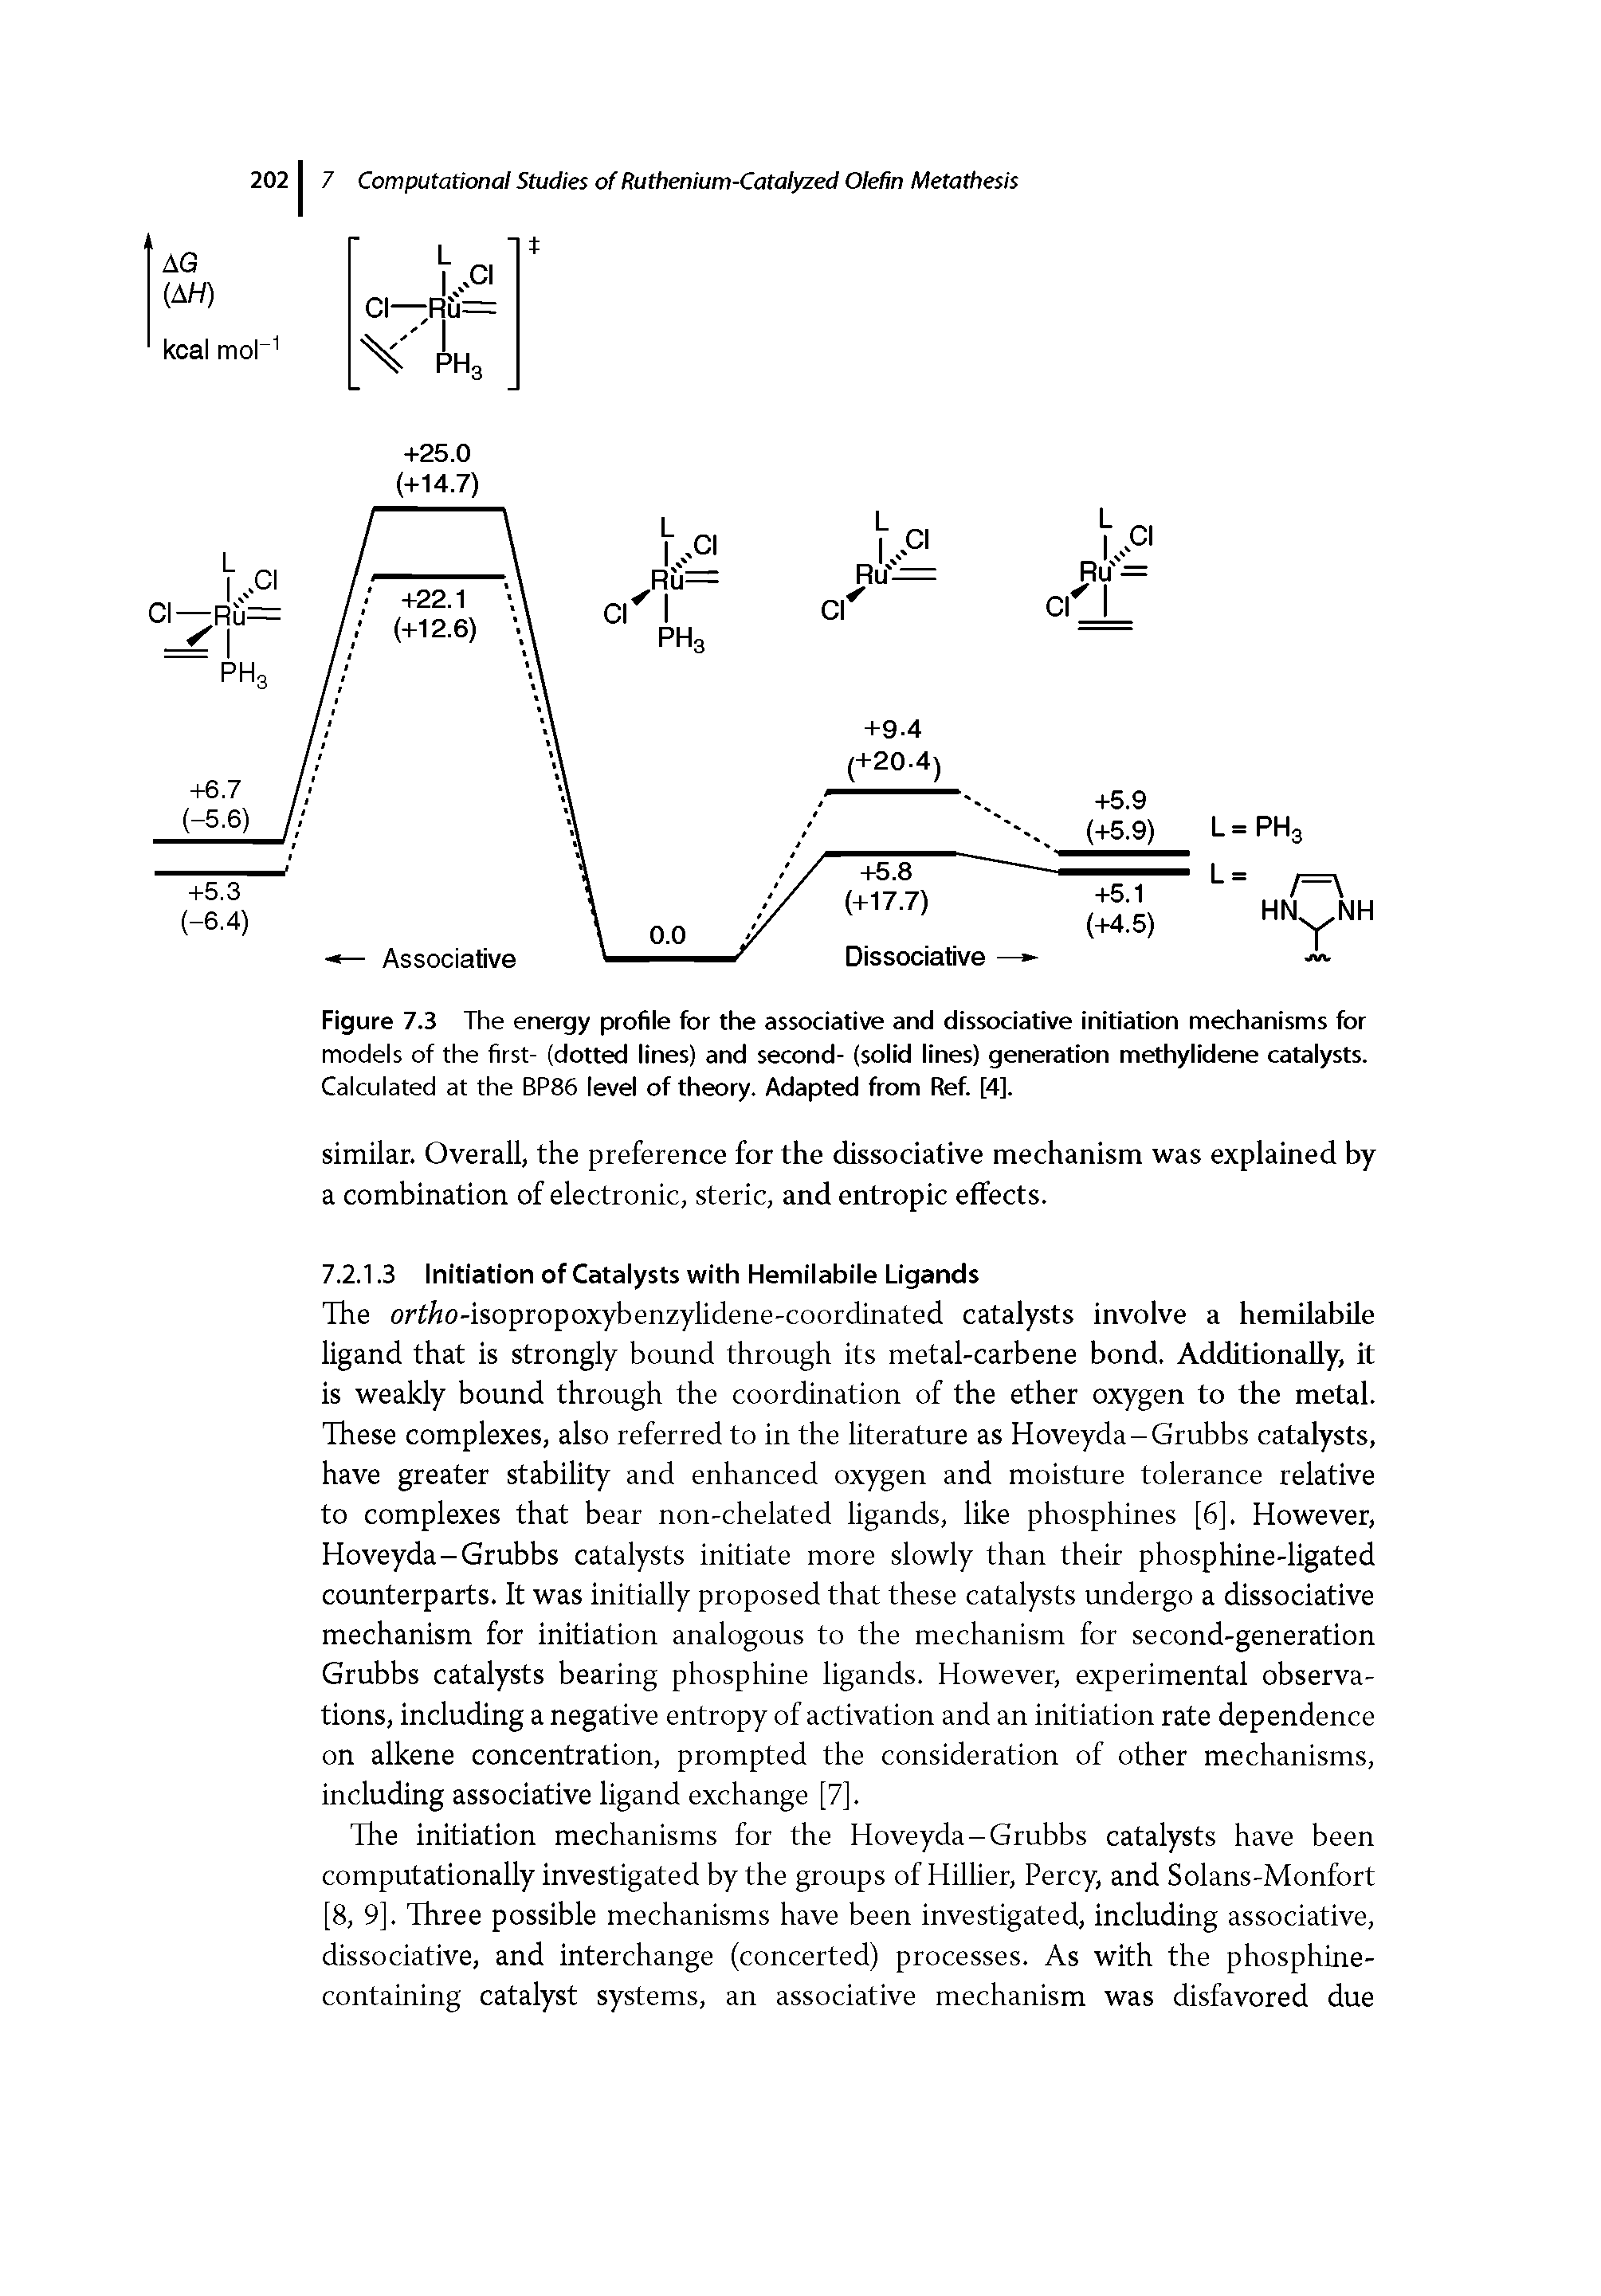 Figure 7.3 The energy profile for the associative and dissociative initiation mechanisms for models of the first- (dotted lines) and second- (solid lines) generation methylidene catalysts. Calculated at the BP86 level of theory. Adapted from Ref. [4].